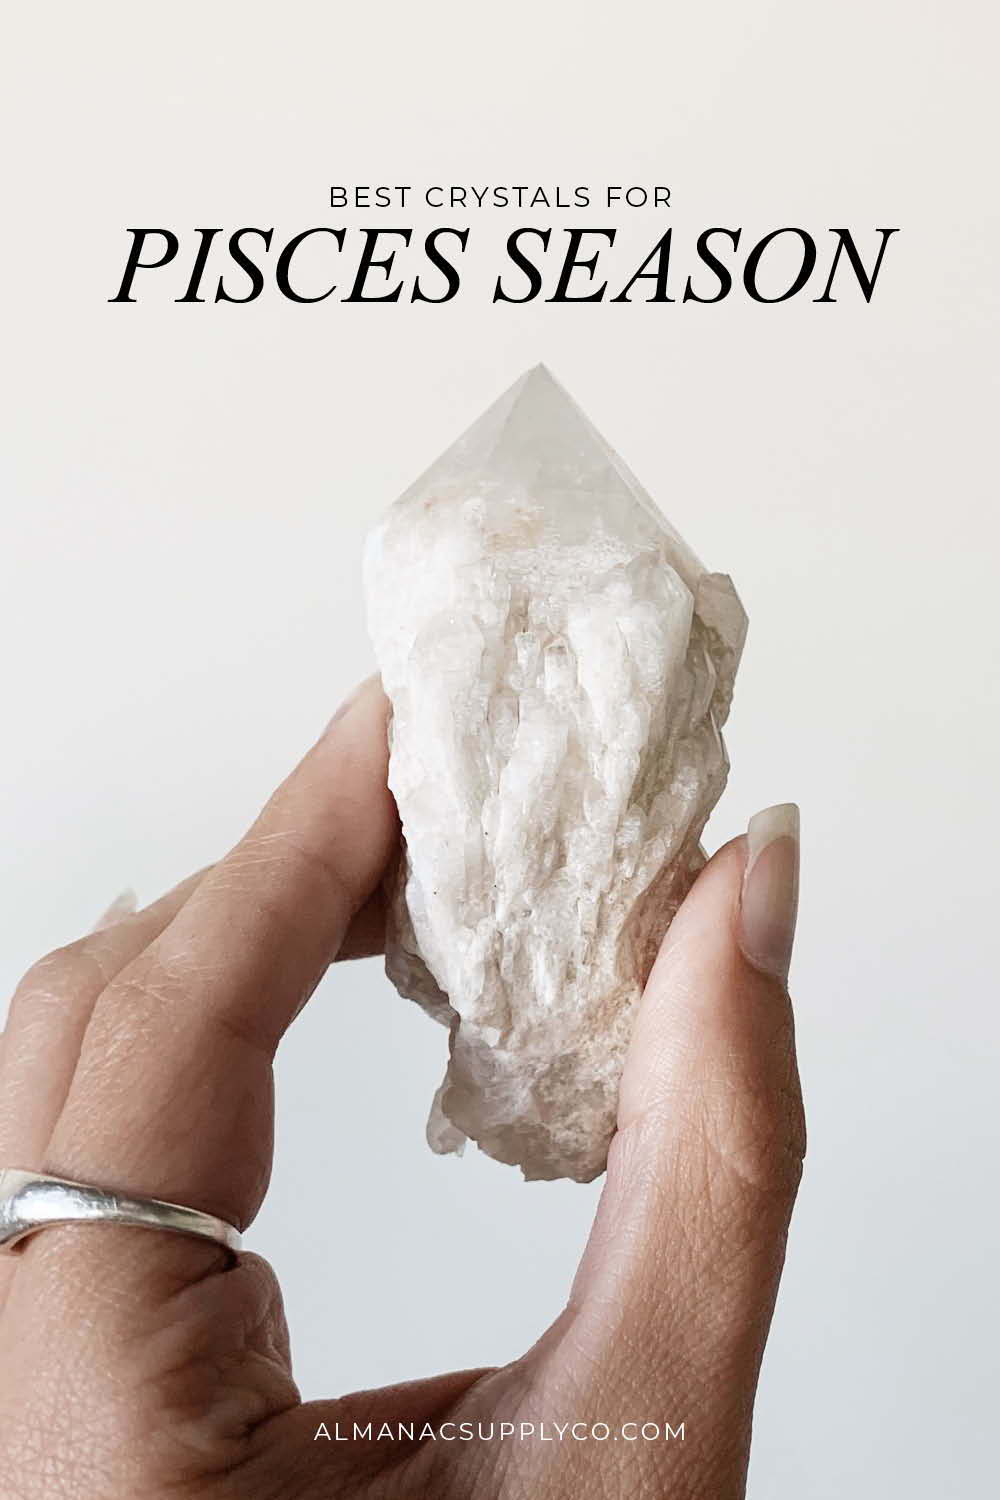 The Best Crystals for Pisces